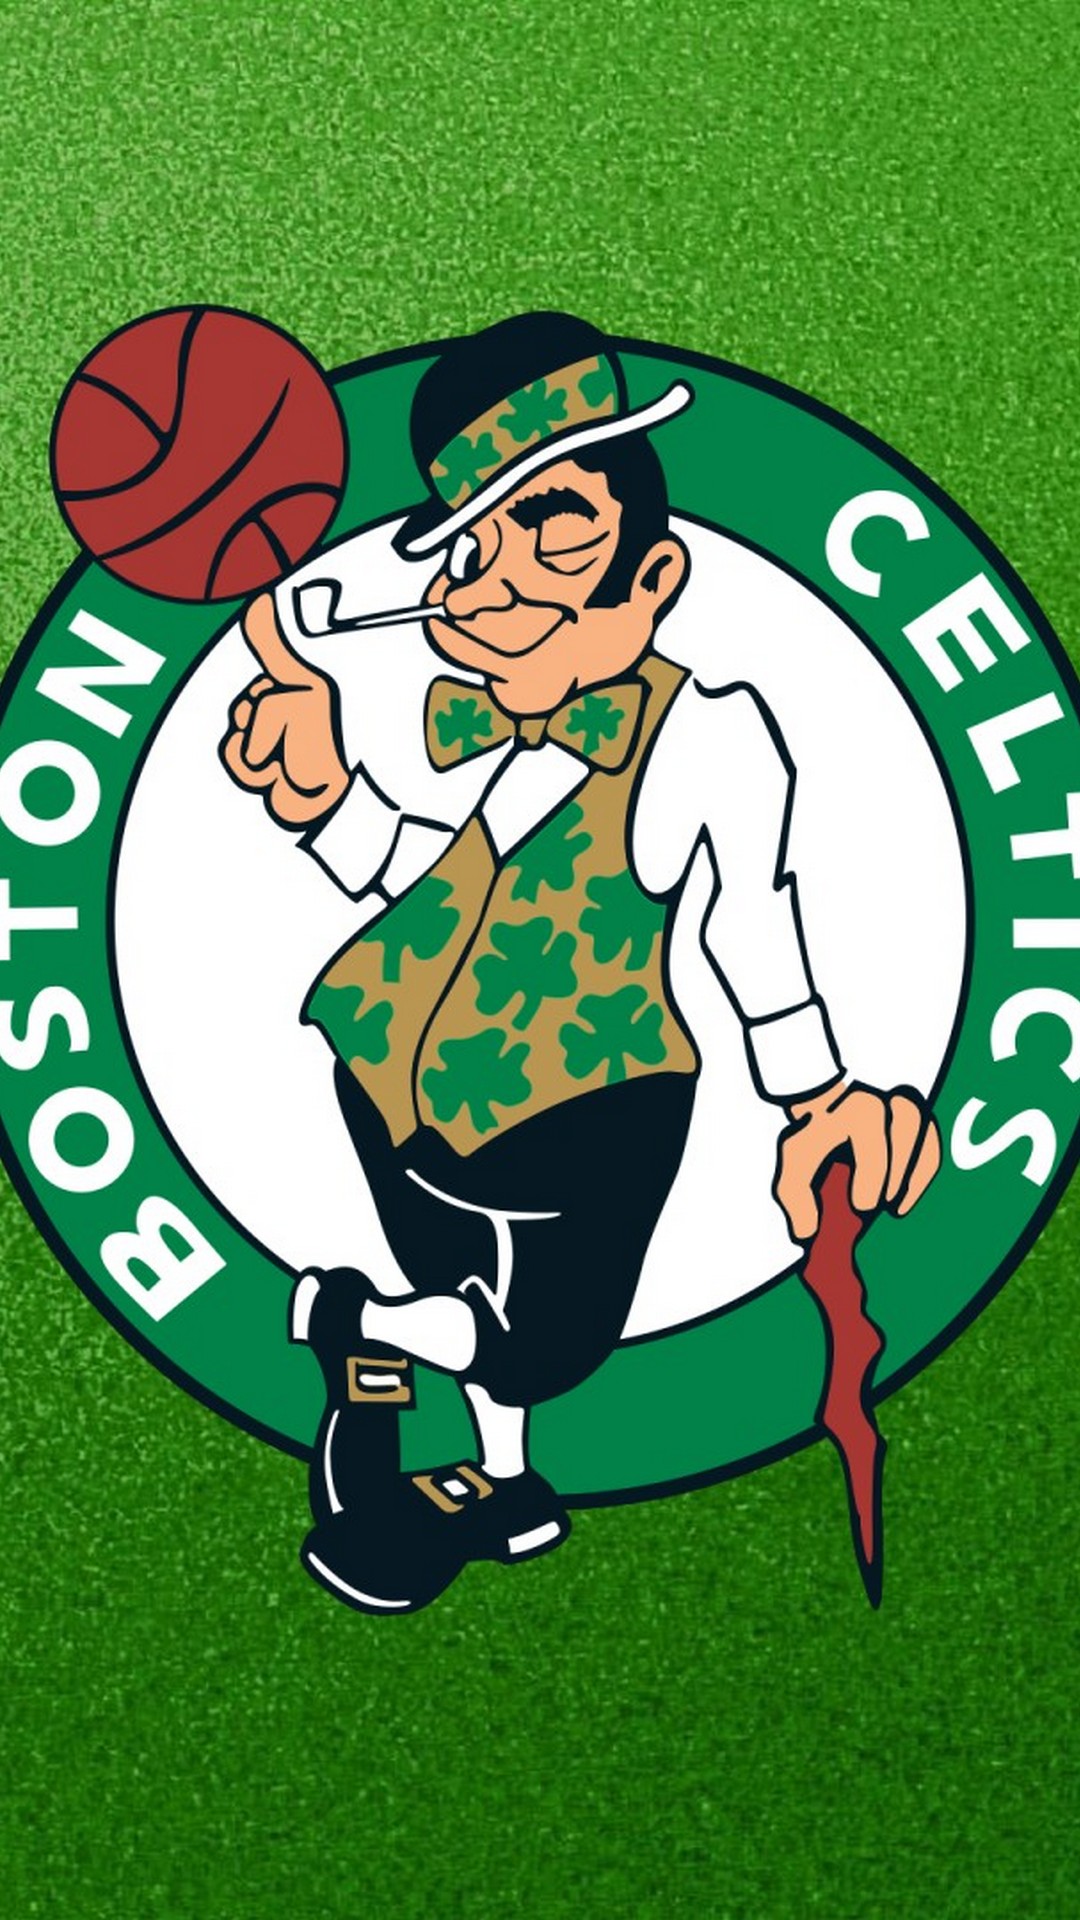 Boston Celtics Wallpaper Android with image resolution 1080x1920 pixel. You can make this wallpaper for your Android backgrounds, Tablet, Smartphones Screensavers and Mobile Phone Lock Screen